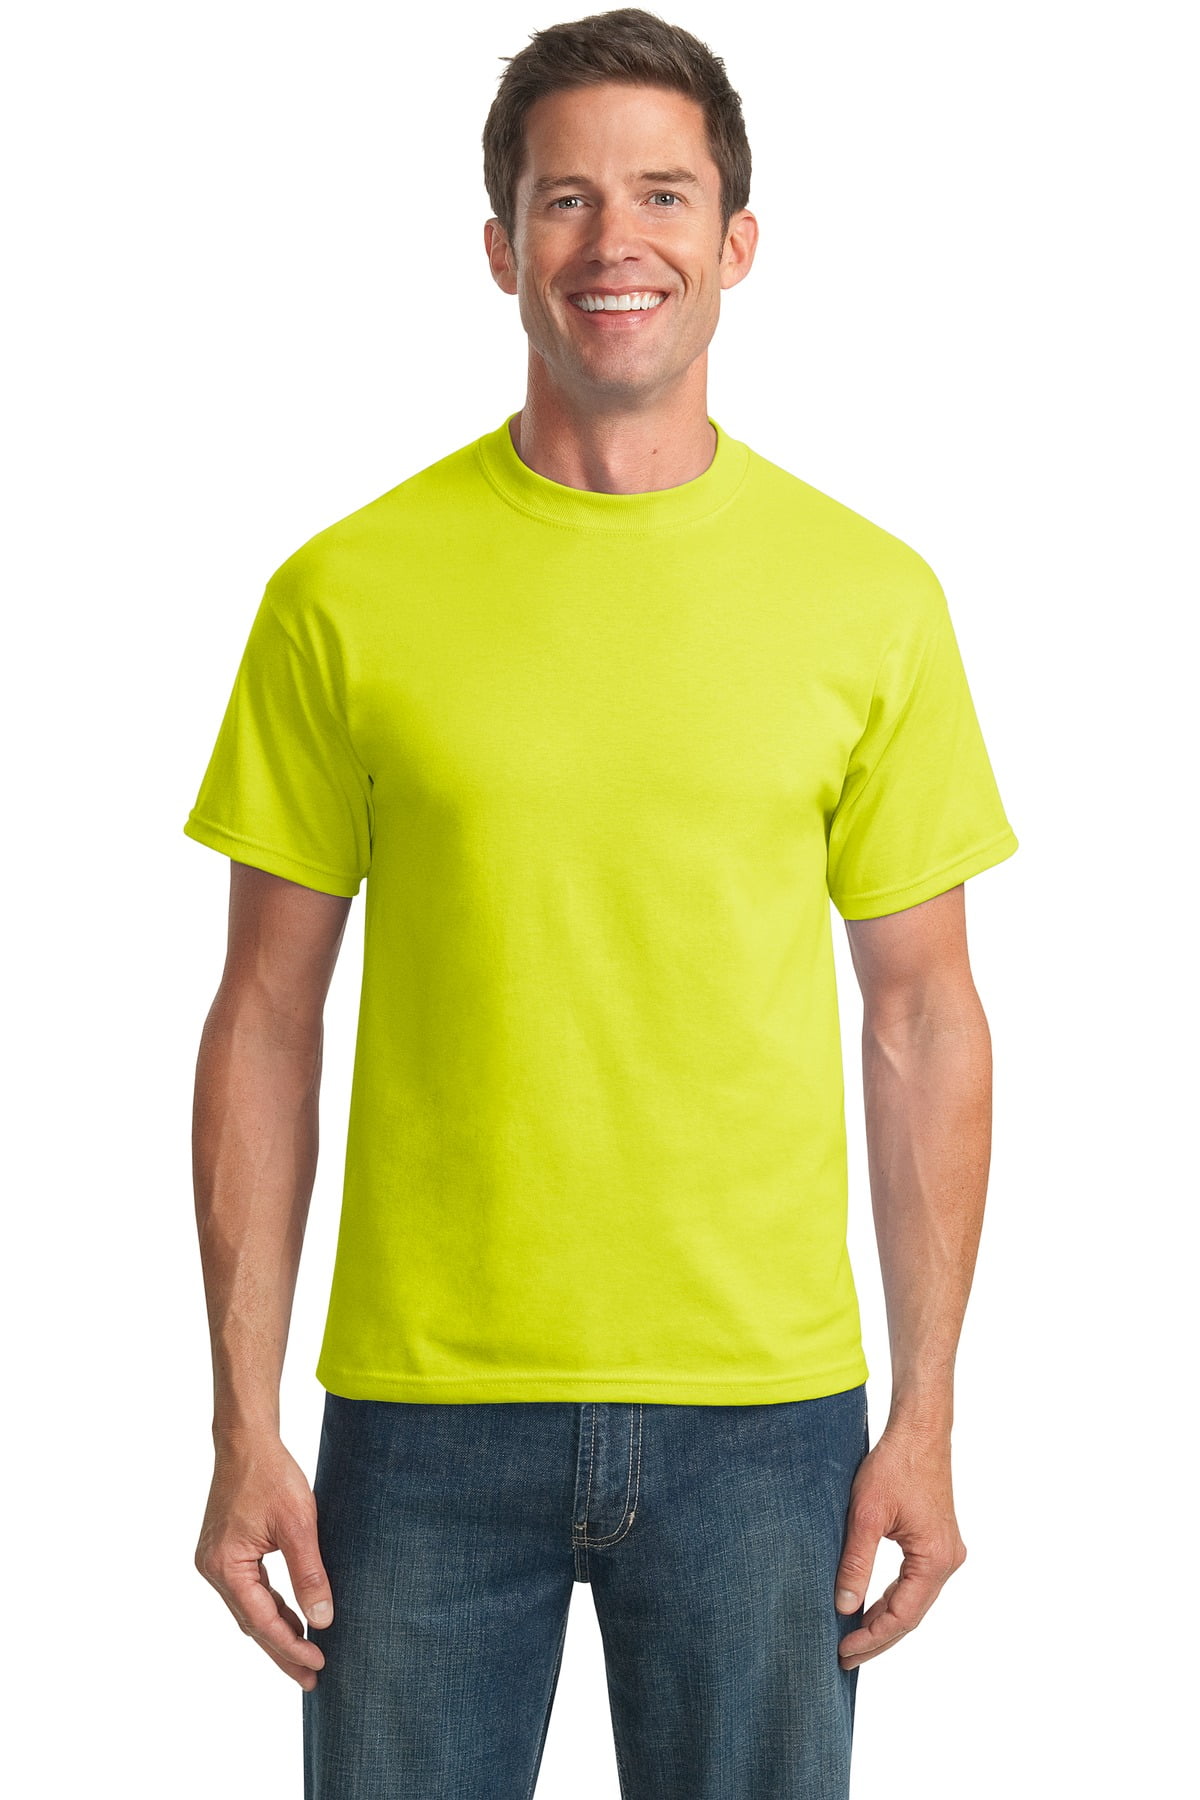 Port & Company Tall Core Blend Tee-4XLT (Safety Green) 